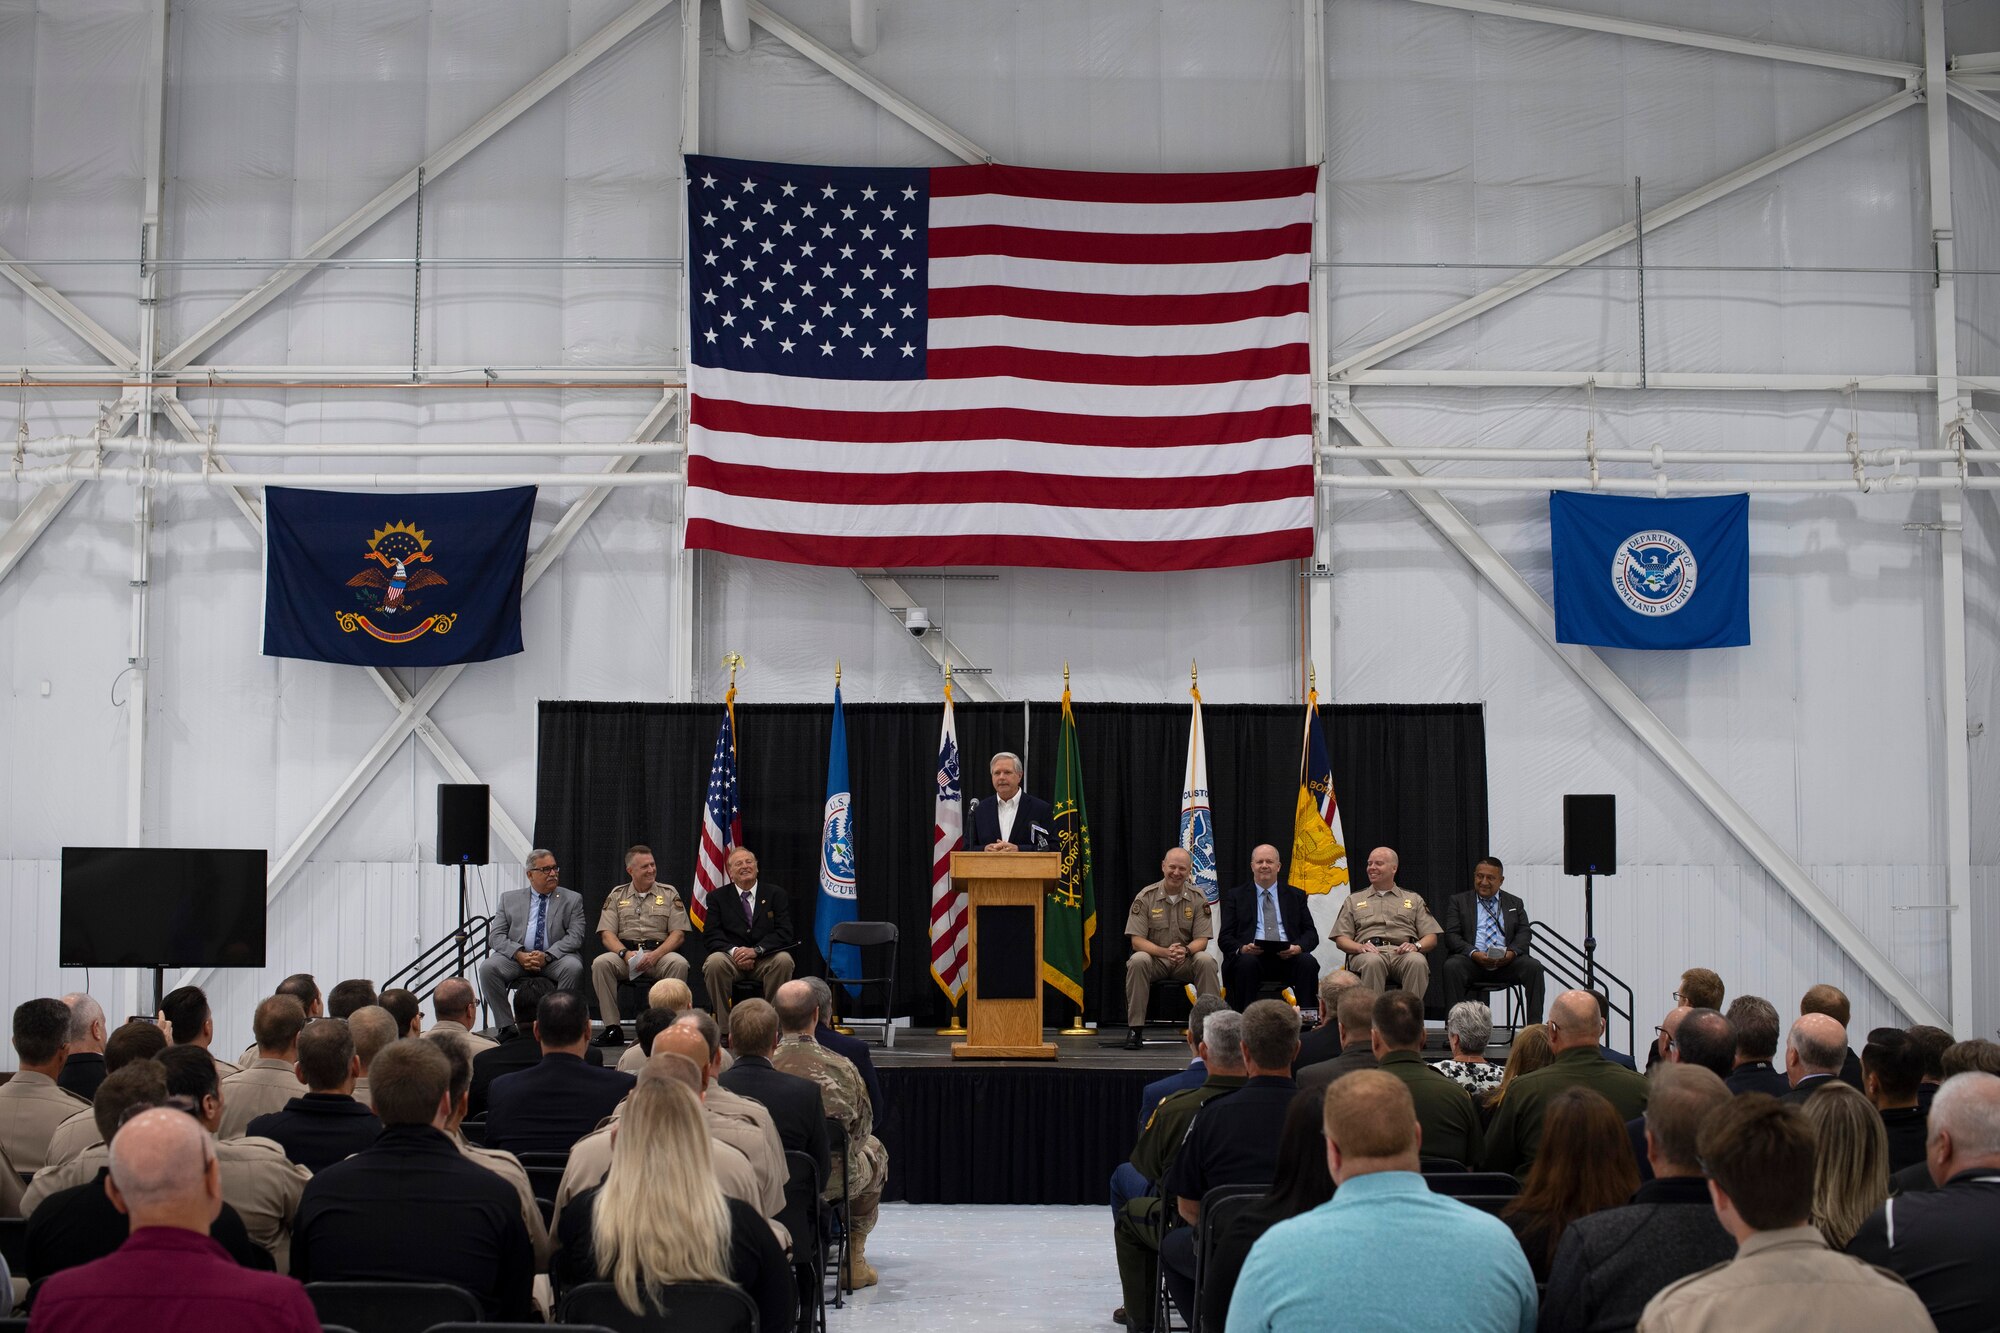 North Dakota Senator John Hoeven offers remarks during a ceremony August 28, 2019, on Grand Forks Air Force Base, North Dakota. The ceremony marked the official opening of U.S. Customs and Border Protection’s newly-renovated National Air Security Operations Center, an unmanned aerial system training center on base. (U.S. Air Force photo by Senior Airman Elora J. Martinez)